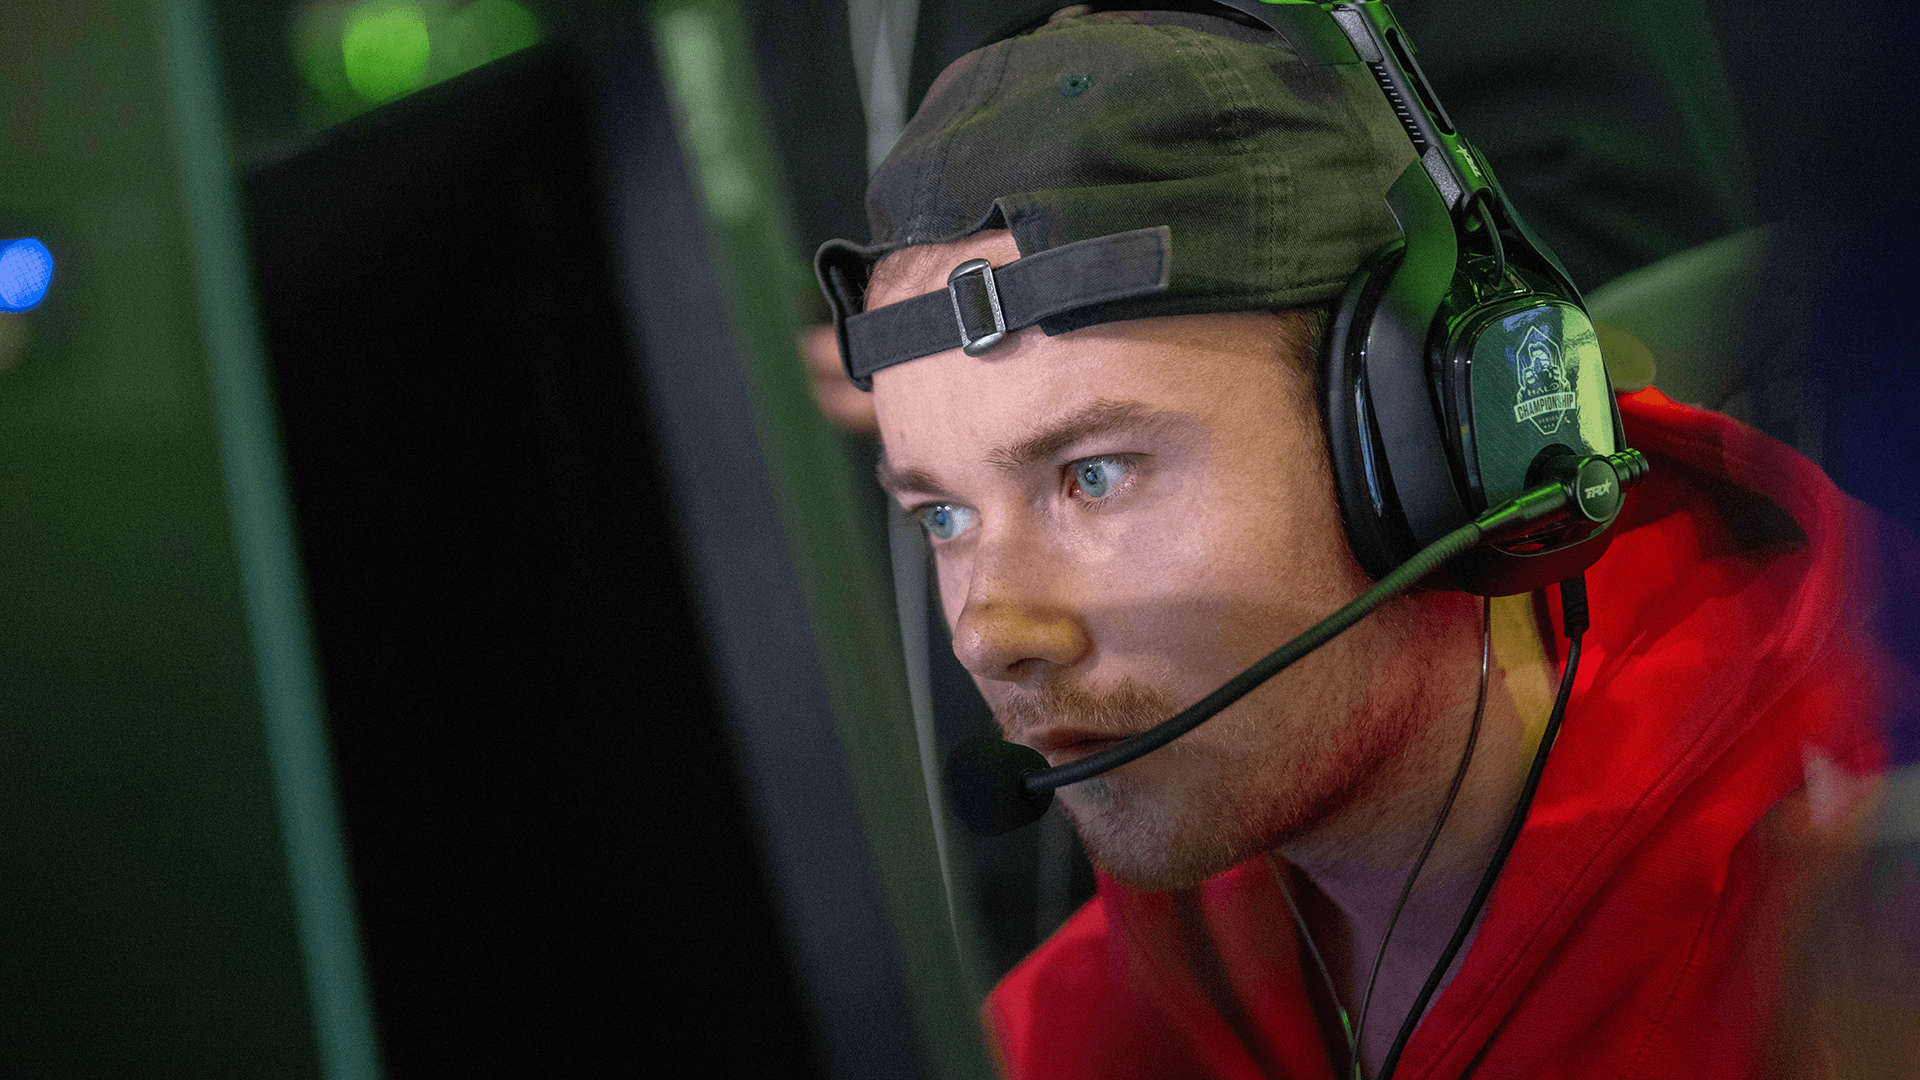 Halo Pro "Sica" in the zone on the HCS main stage